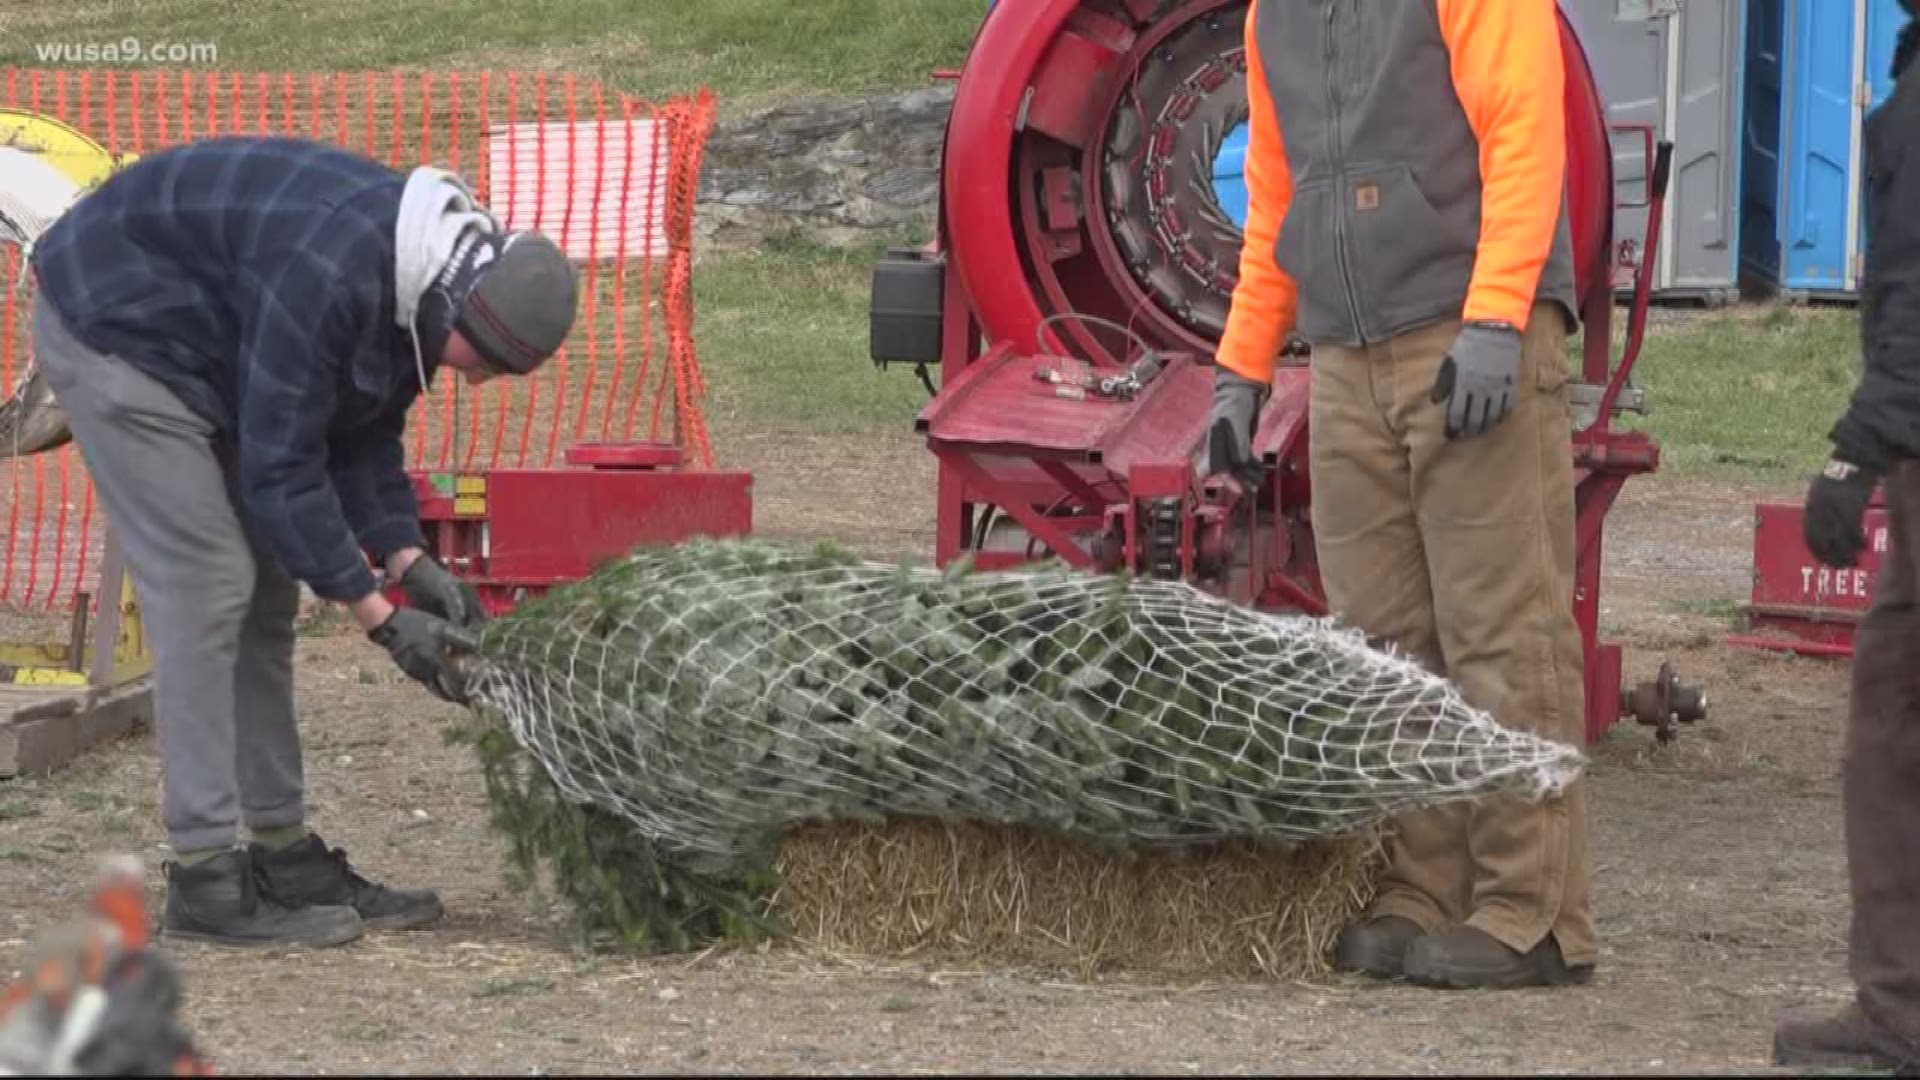 According to the National Christmas Tree Association, the average cost of a Christmas tree is now up to $75.